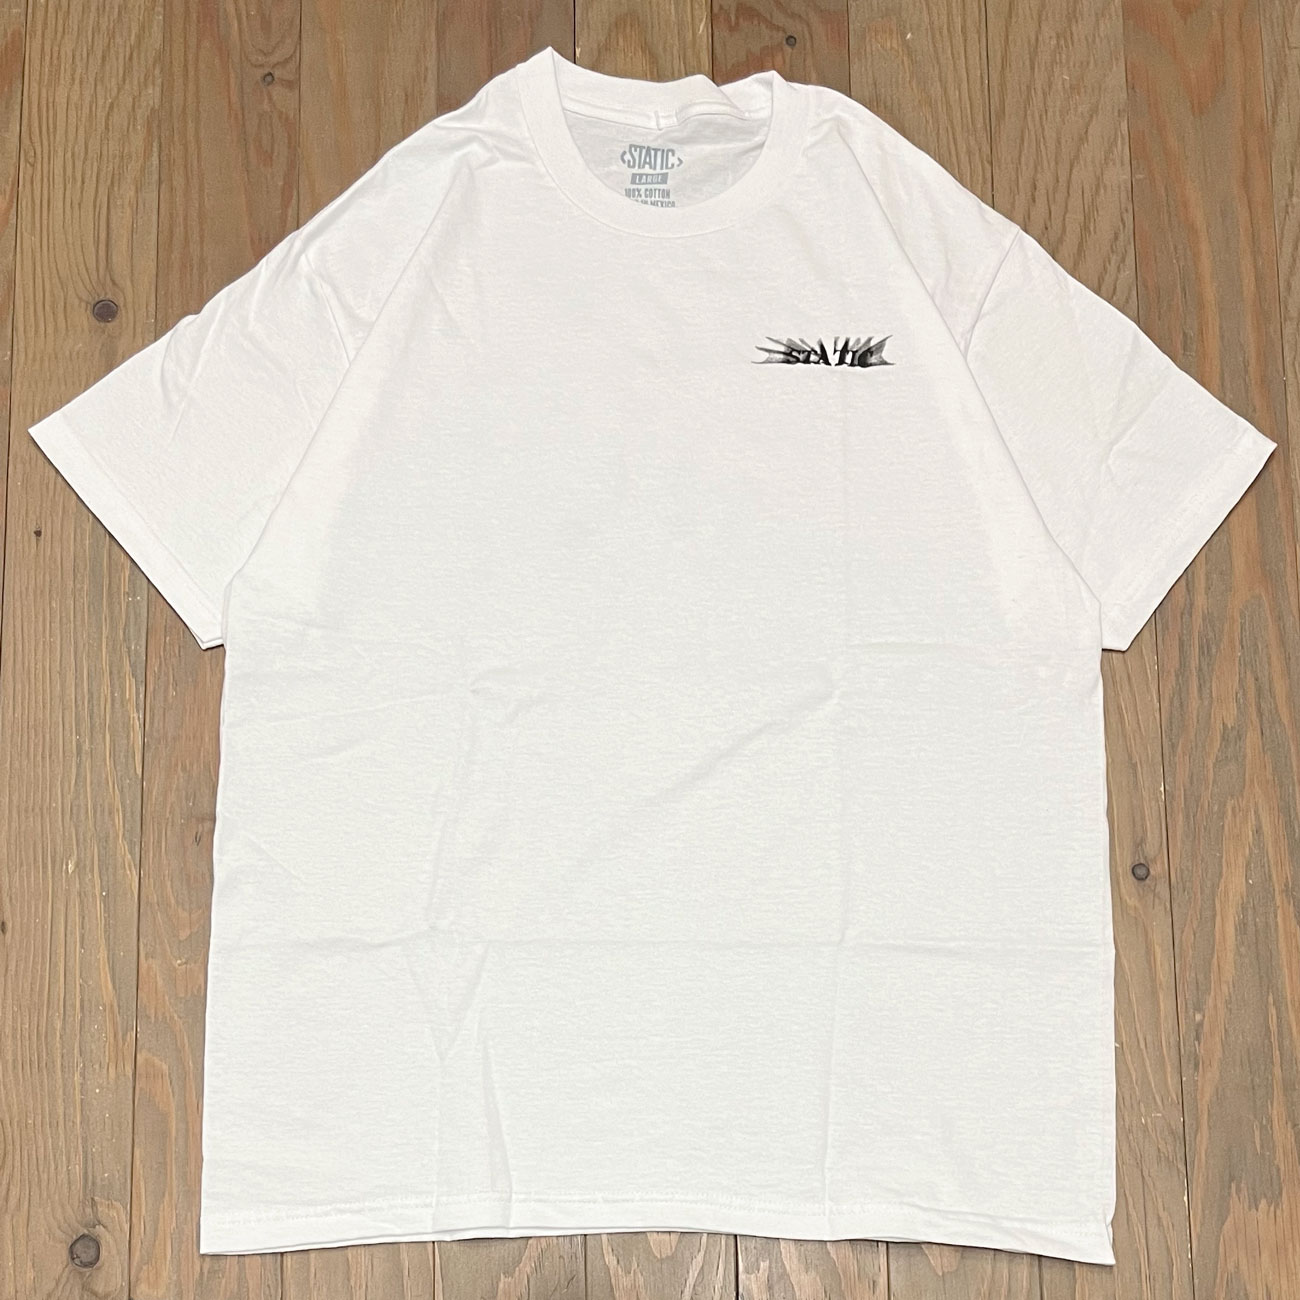 THEORIES SPECTACLE TEE